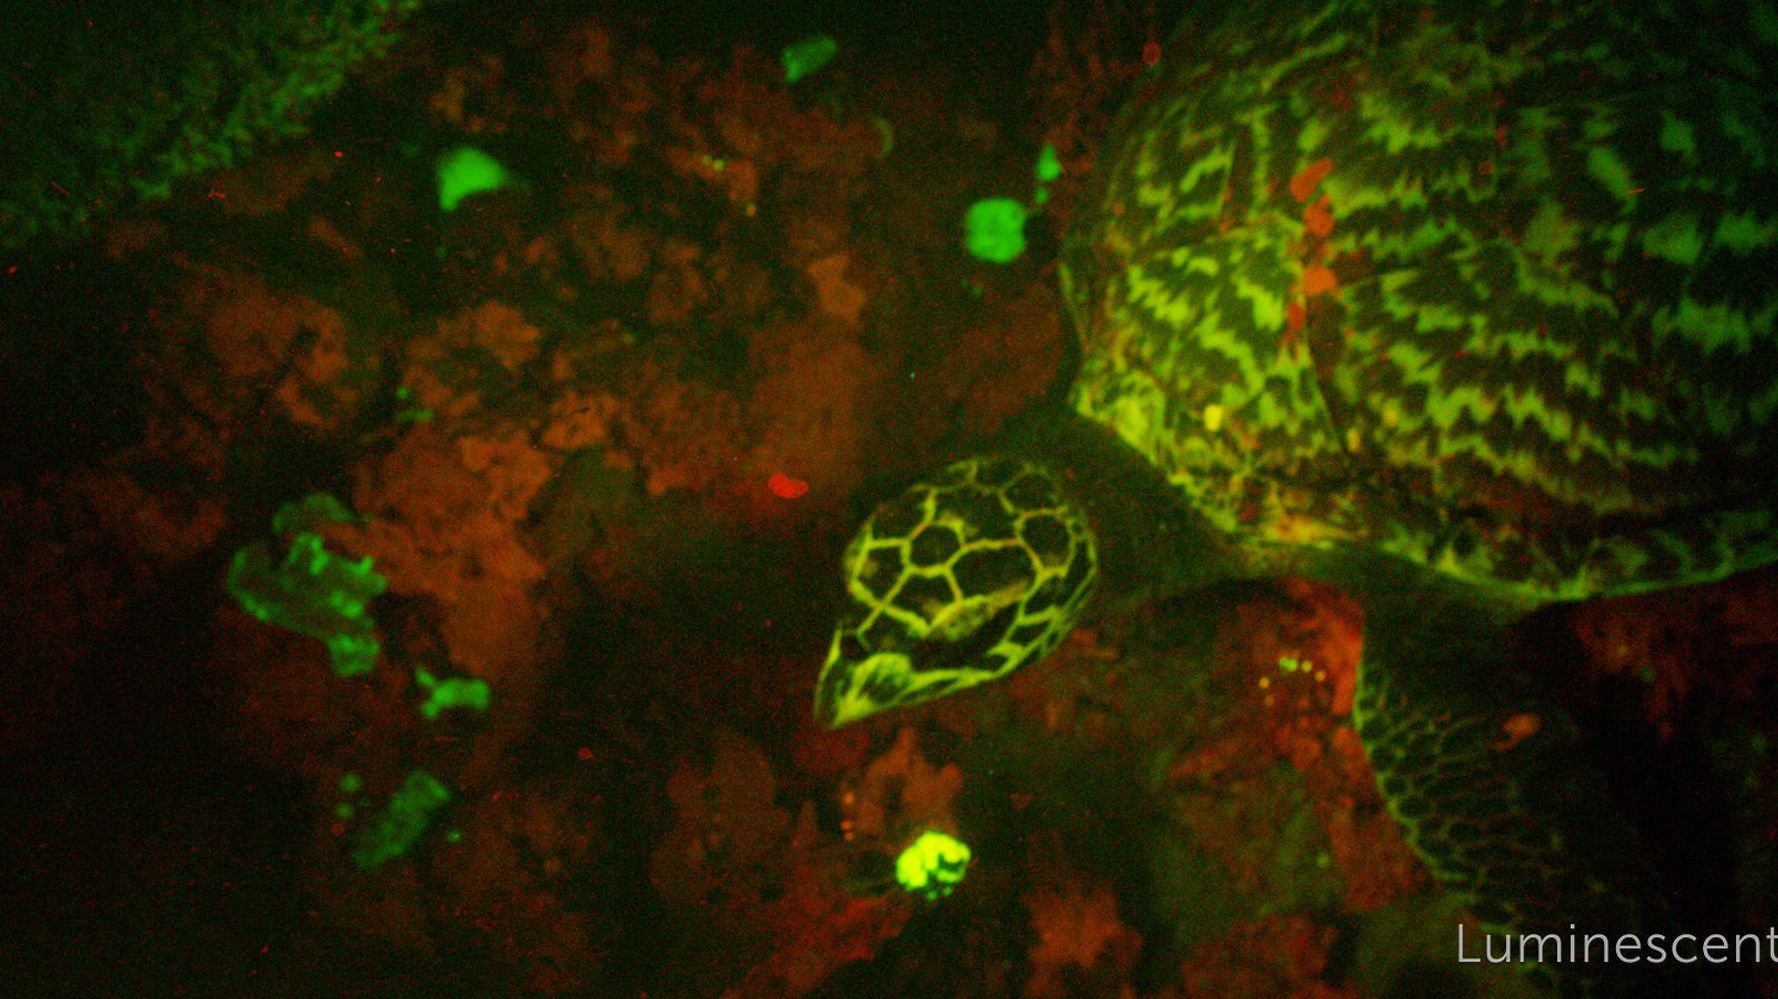 Scientists Discover 'Glowing' Sea Turtle